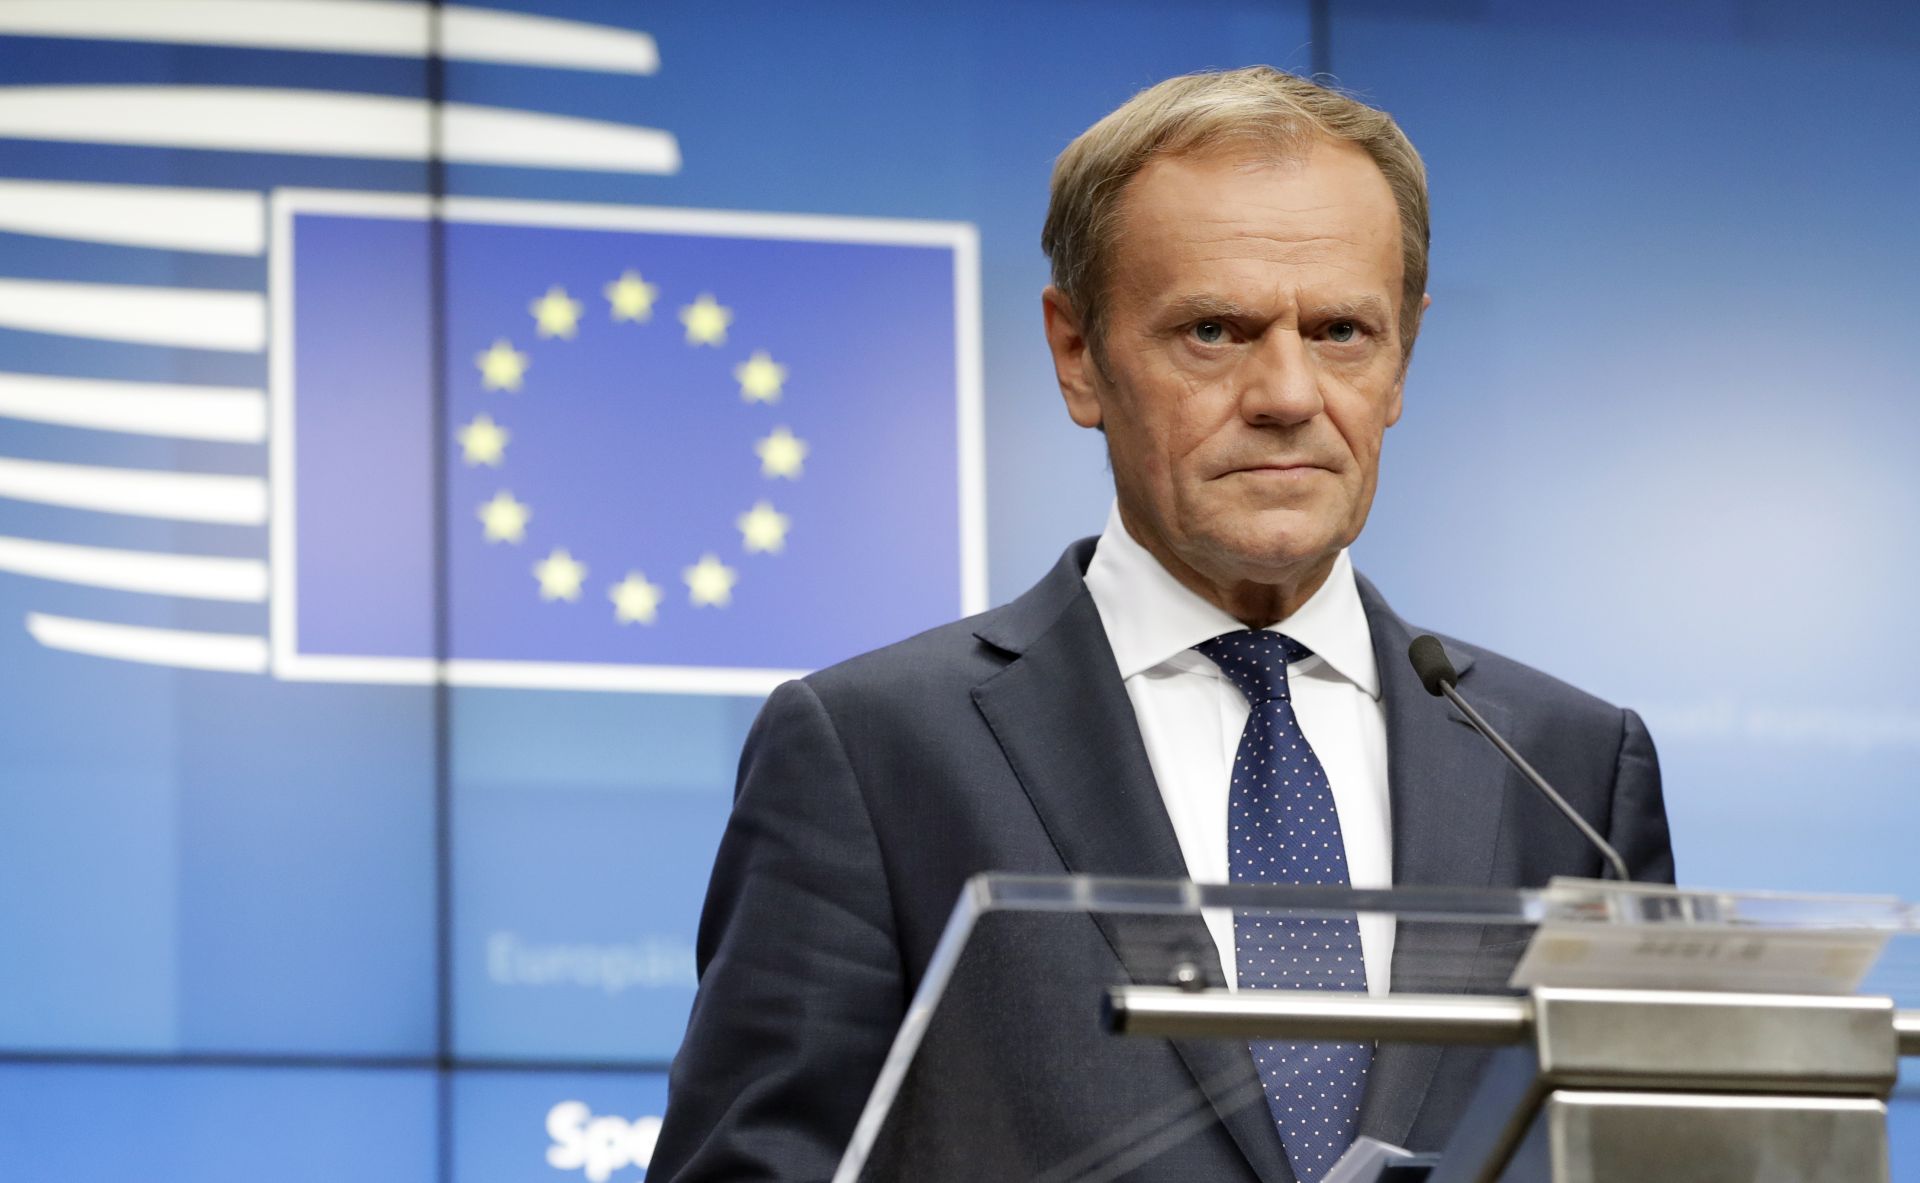 epa07690322 European Council President Donald Tusk   gives a press conference at the end of a Special European Council in Brussels, Belgium, 02 July 2019. Heads of states or governments from EU member states agreed on Charles Michel as the new President of the European Council and nominated German Minister of Defence Ursula von der Leyen as European Commission president, Christine Lagarde as president of the European Central Bank and Josep Borrell as EU's High Representative for Foreign Affairs and Security Policy.  EPA/OLIVIER HOSLET